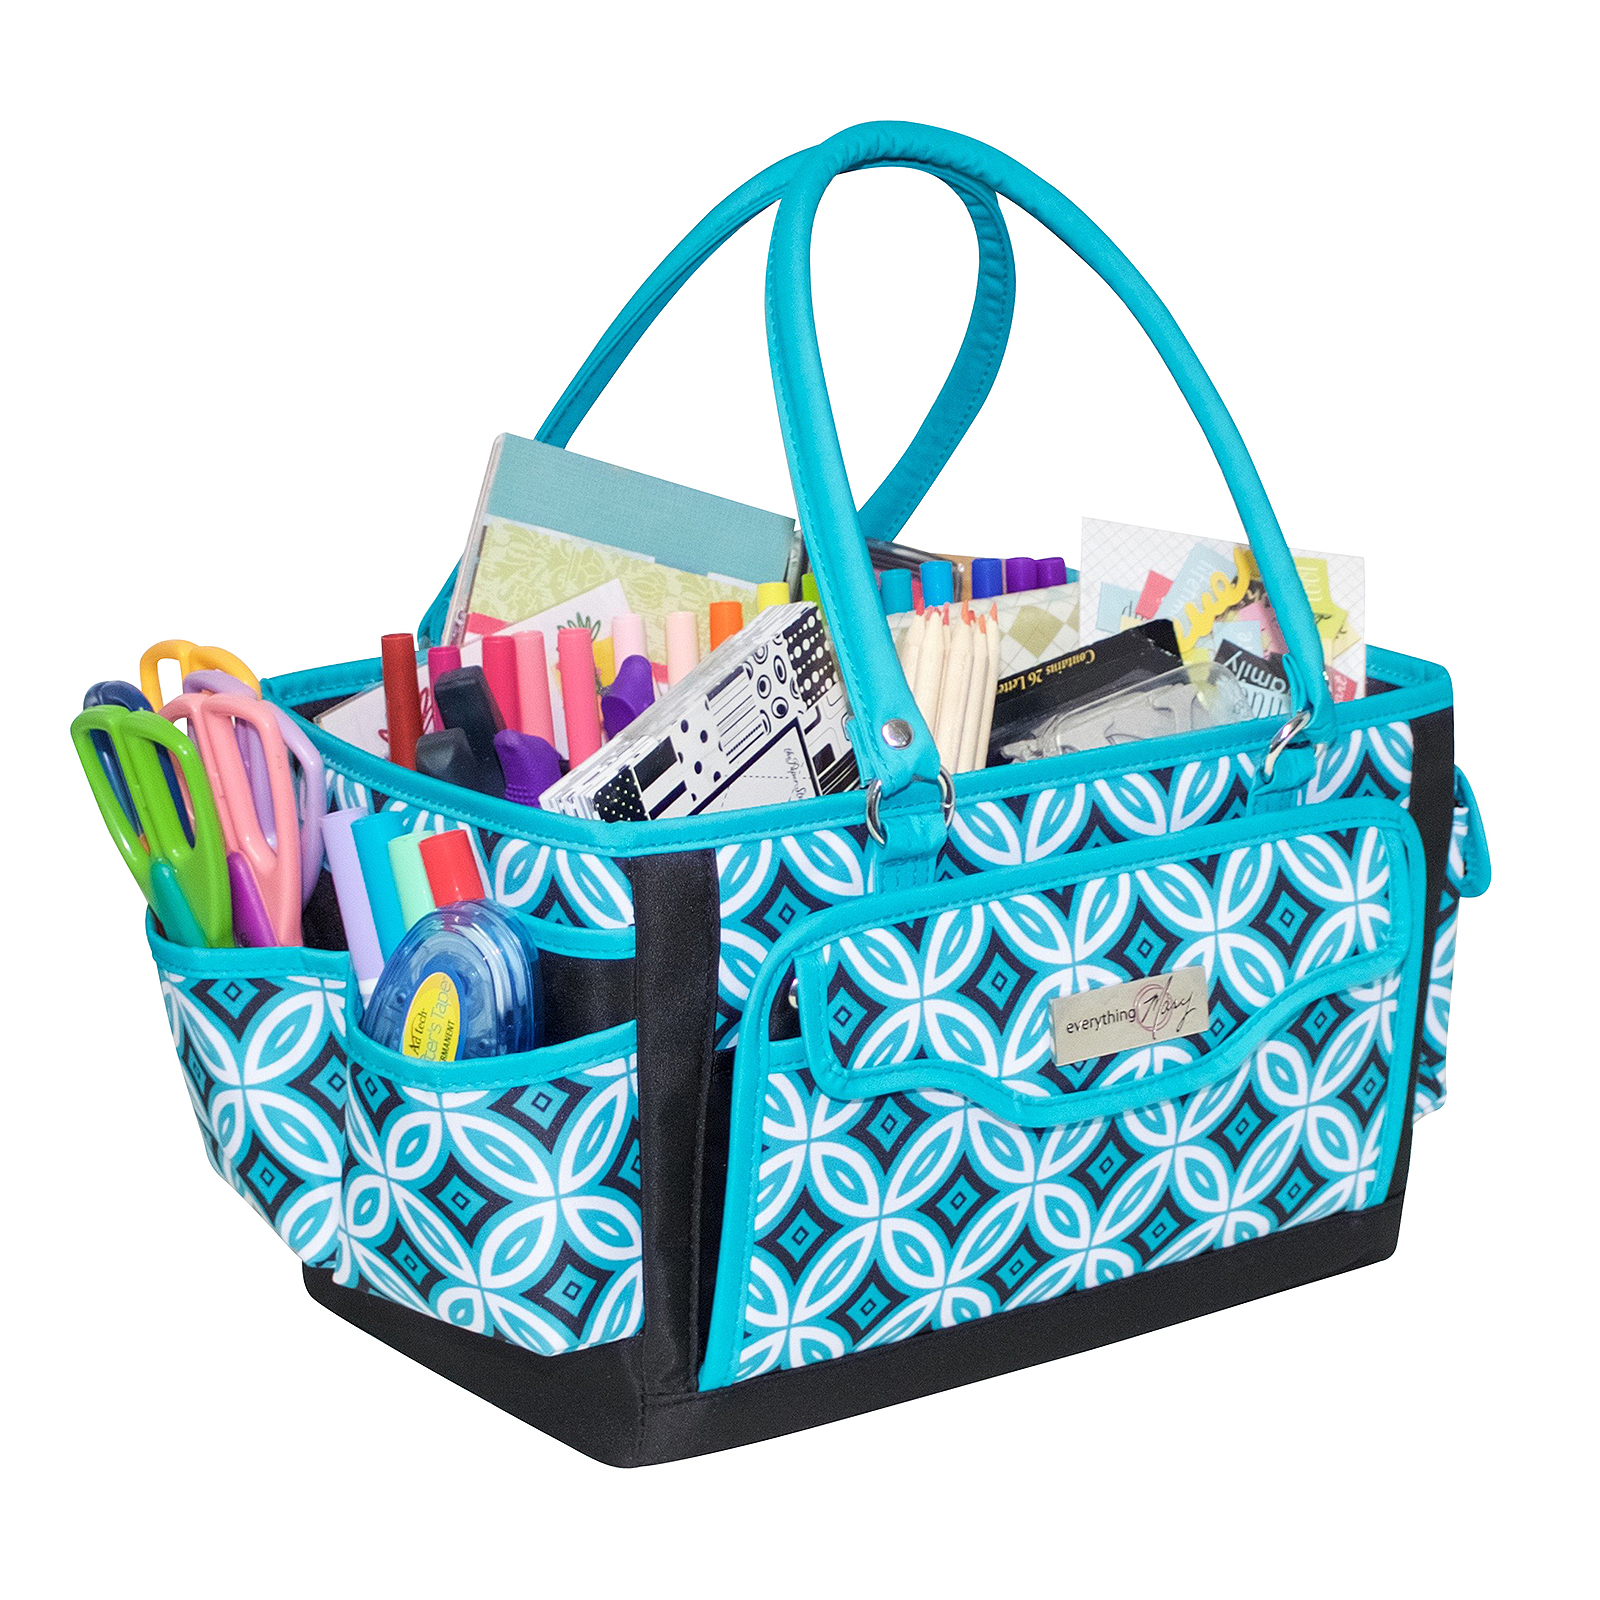 Shop for the Everything Mary™ Deluxe Papercraft Organizer at Michaels